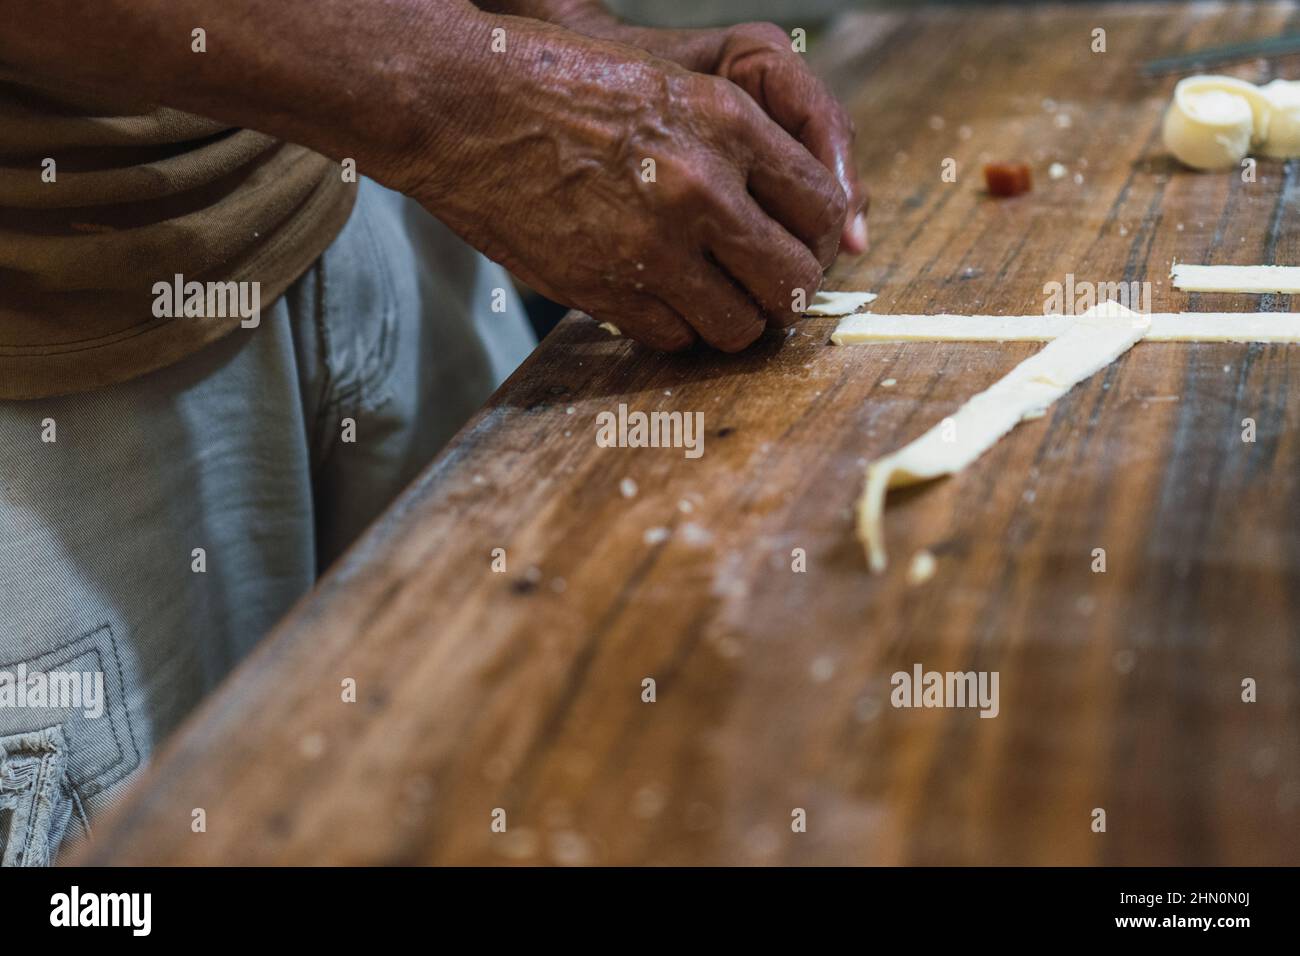 Man's hands cutting cheese on a wooden table Stock Photo